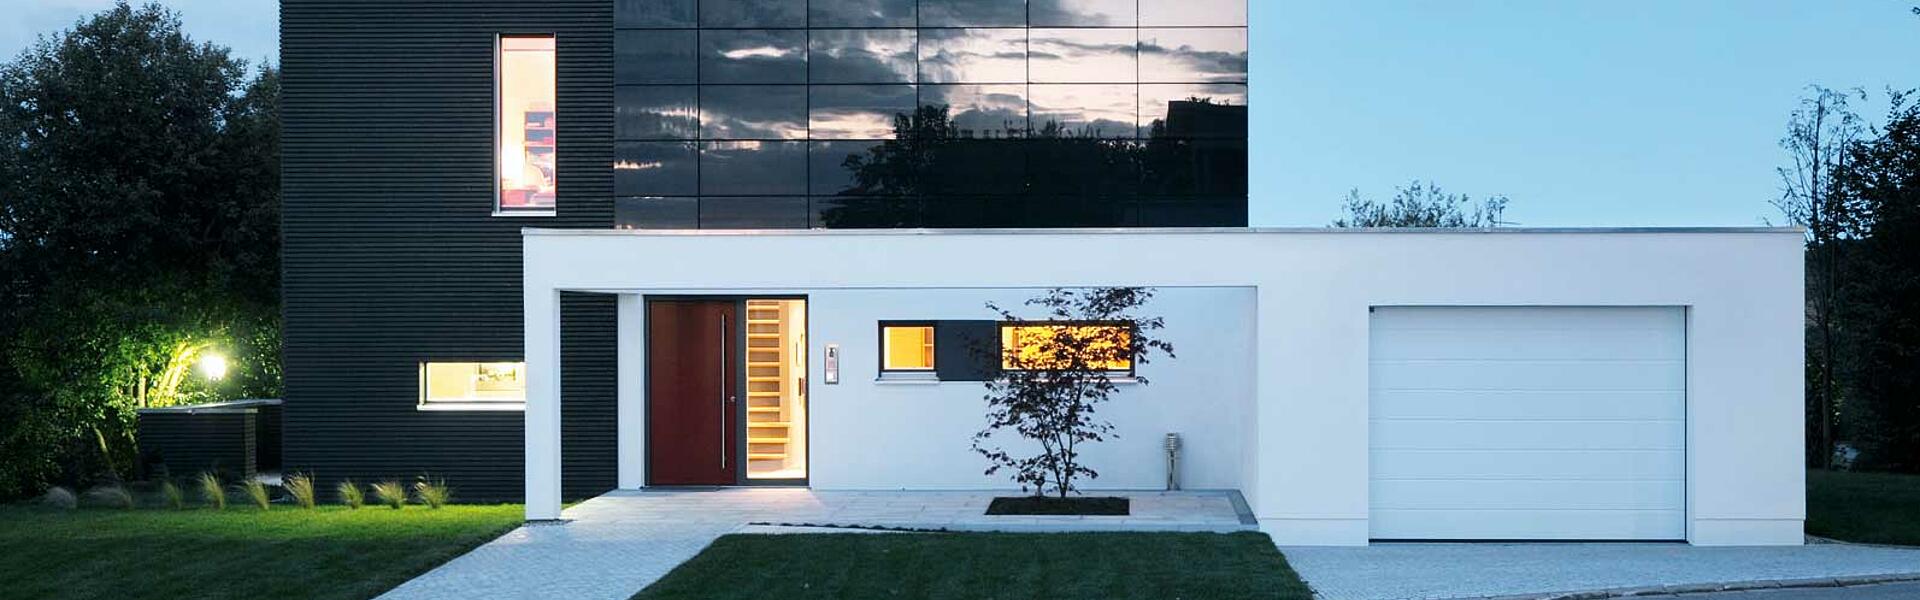 Success Story Incoming invoices SchwoererHaus Two-storey House Garage Mirrored Window Front